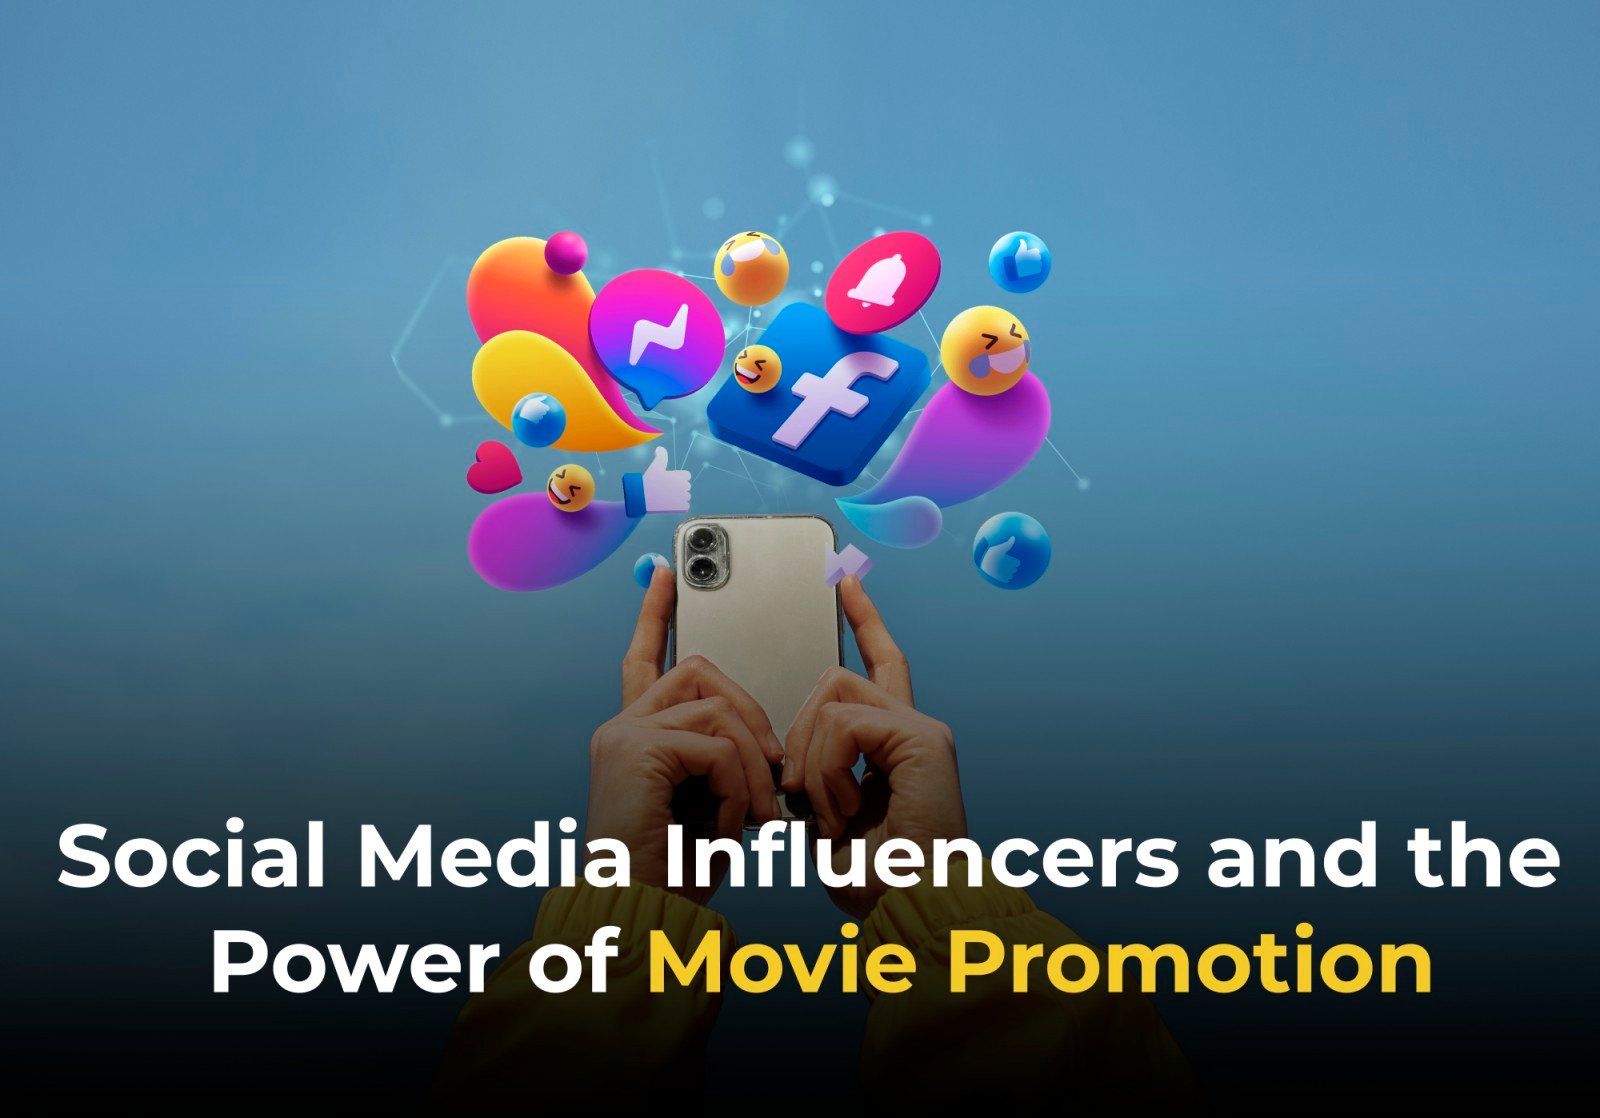 Social Media Influencers and the Power of Movie Promotion: How They’re Helping Small Movies Reach New Audiences